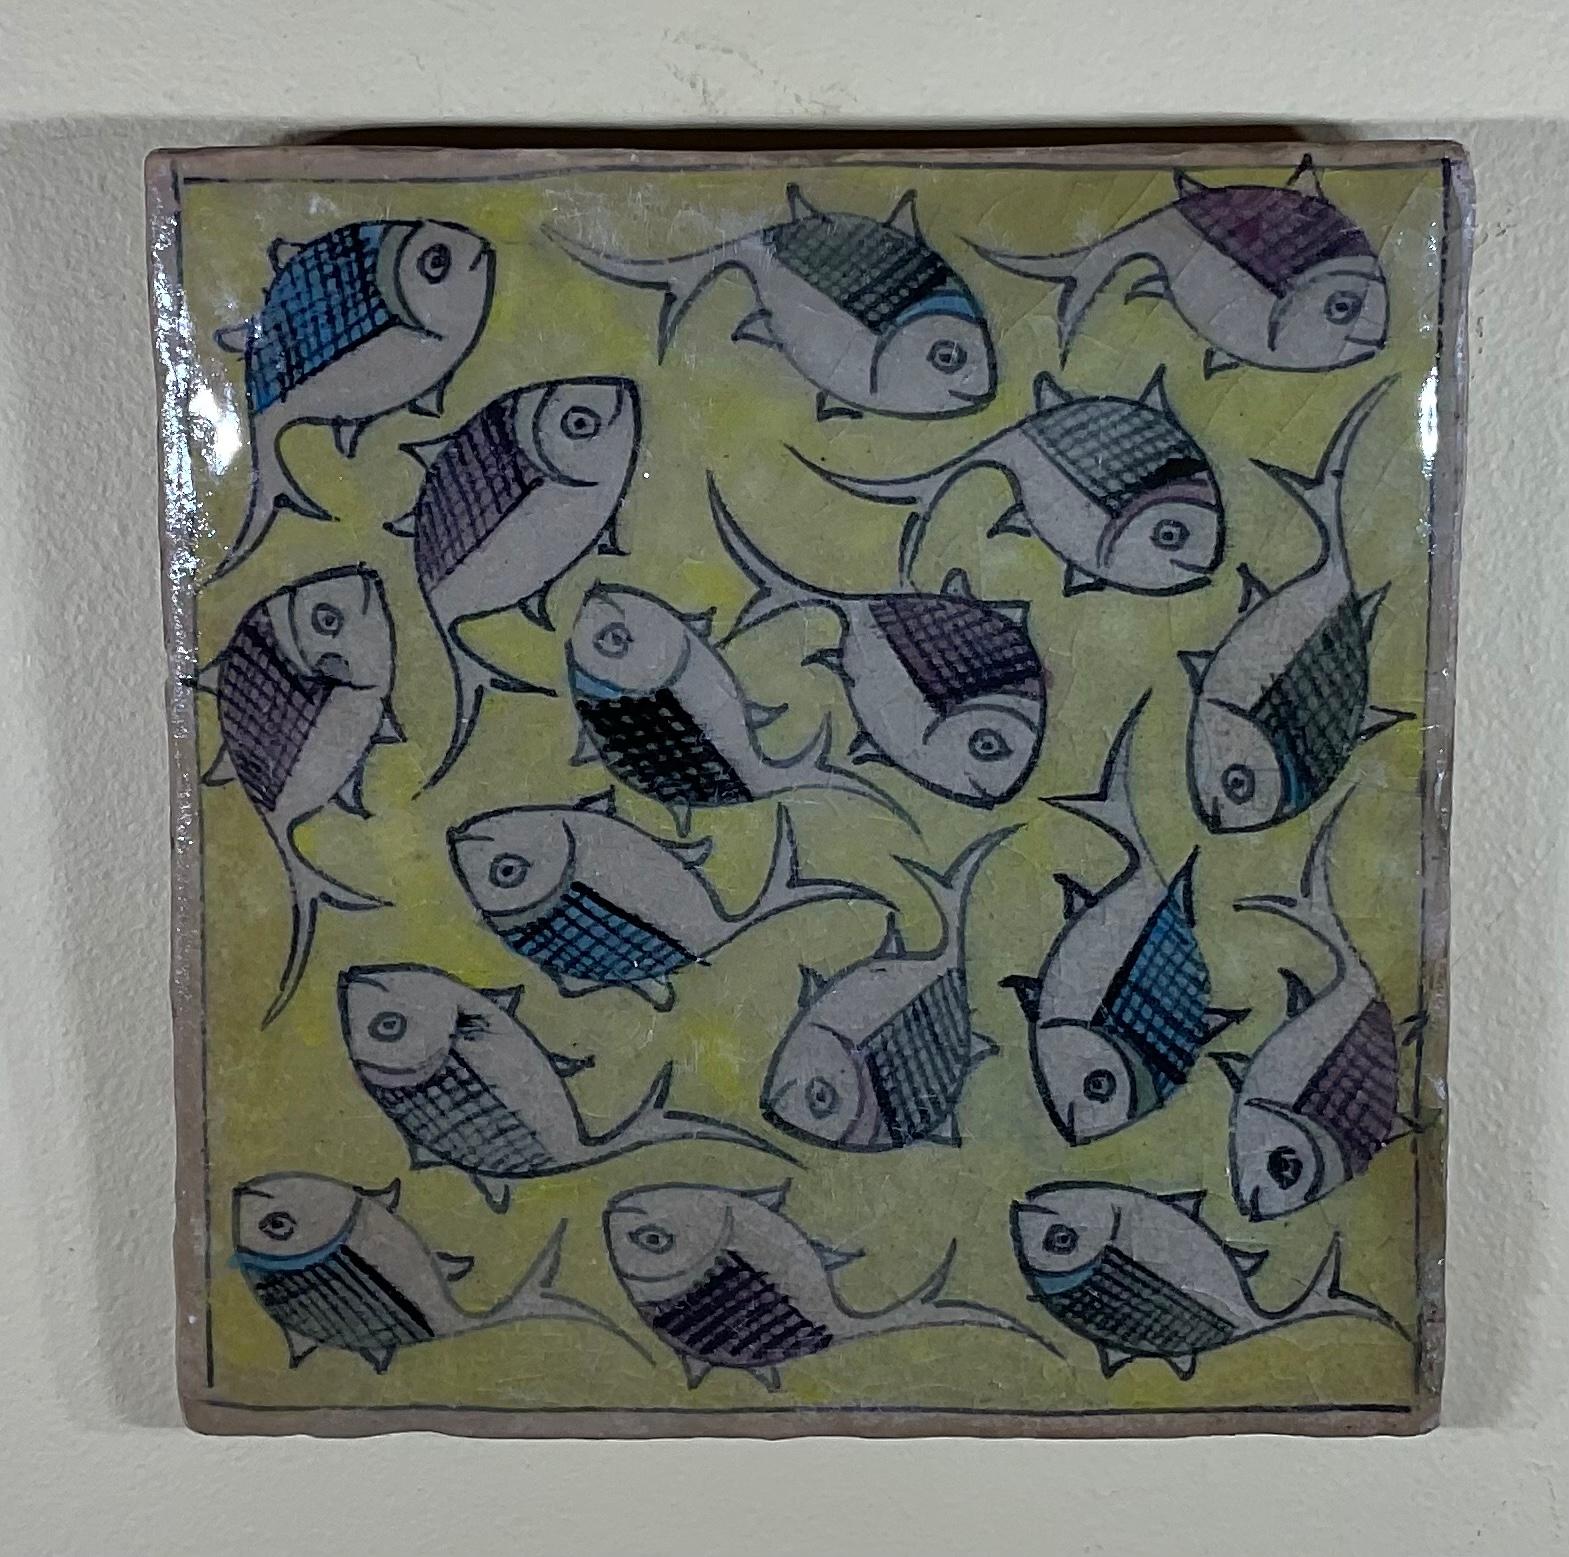 Beautiful tile hand painted and glazed with exceptional wondering colorful school of fish on a yellow color background. The tile can hang on the wall. Exceptional object of art for wall display.